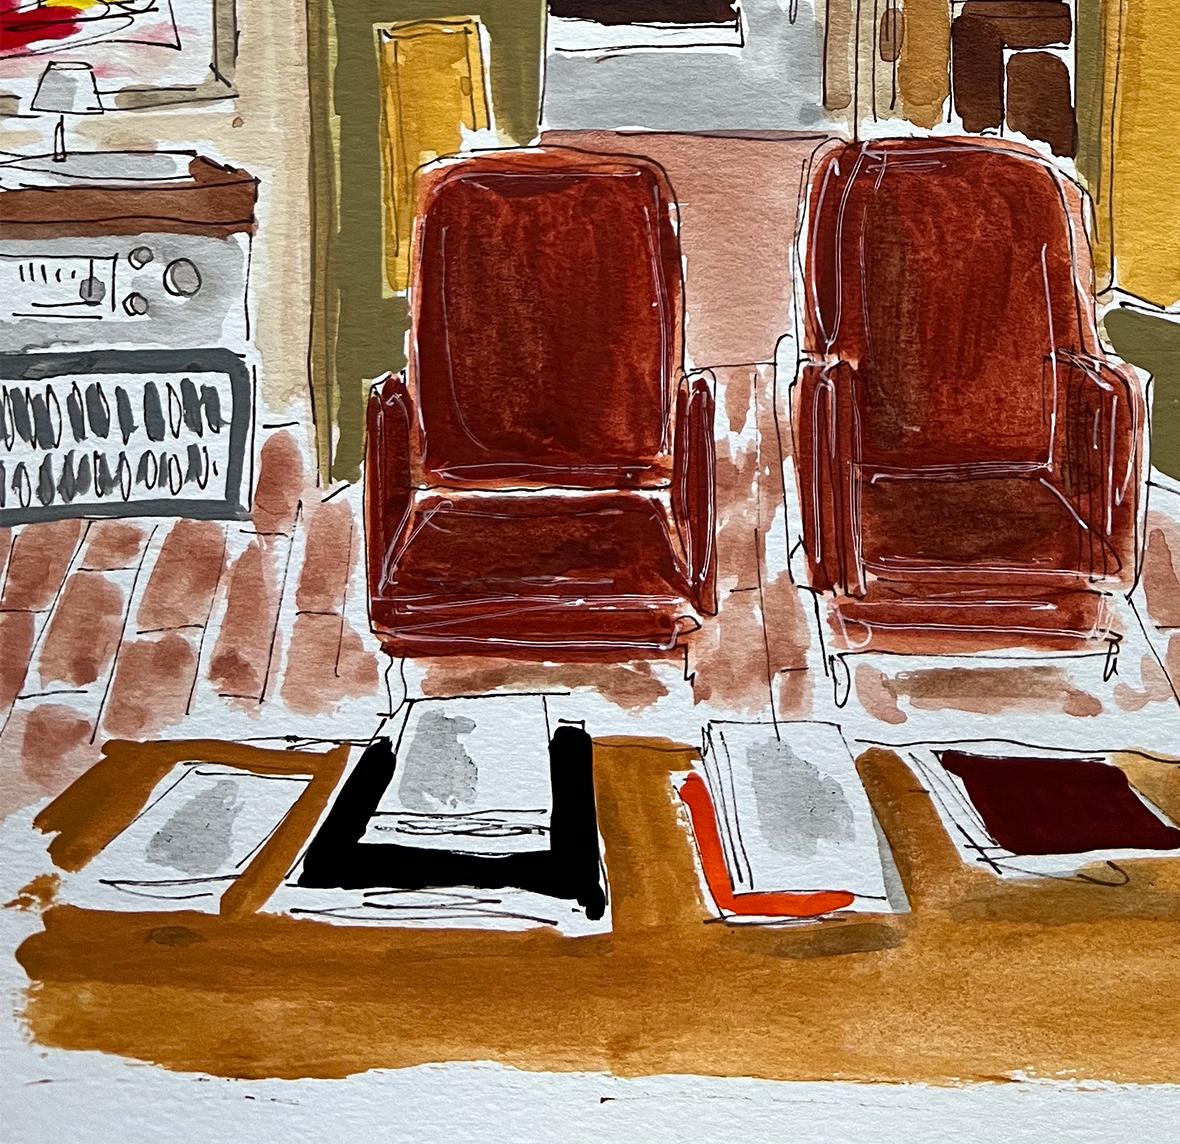 The Home of Aldo Businaro. Watercolor interiors drawing on archival paper - Contemporary Painting by Manuel Santelices